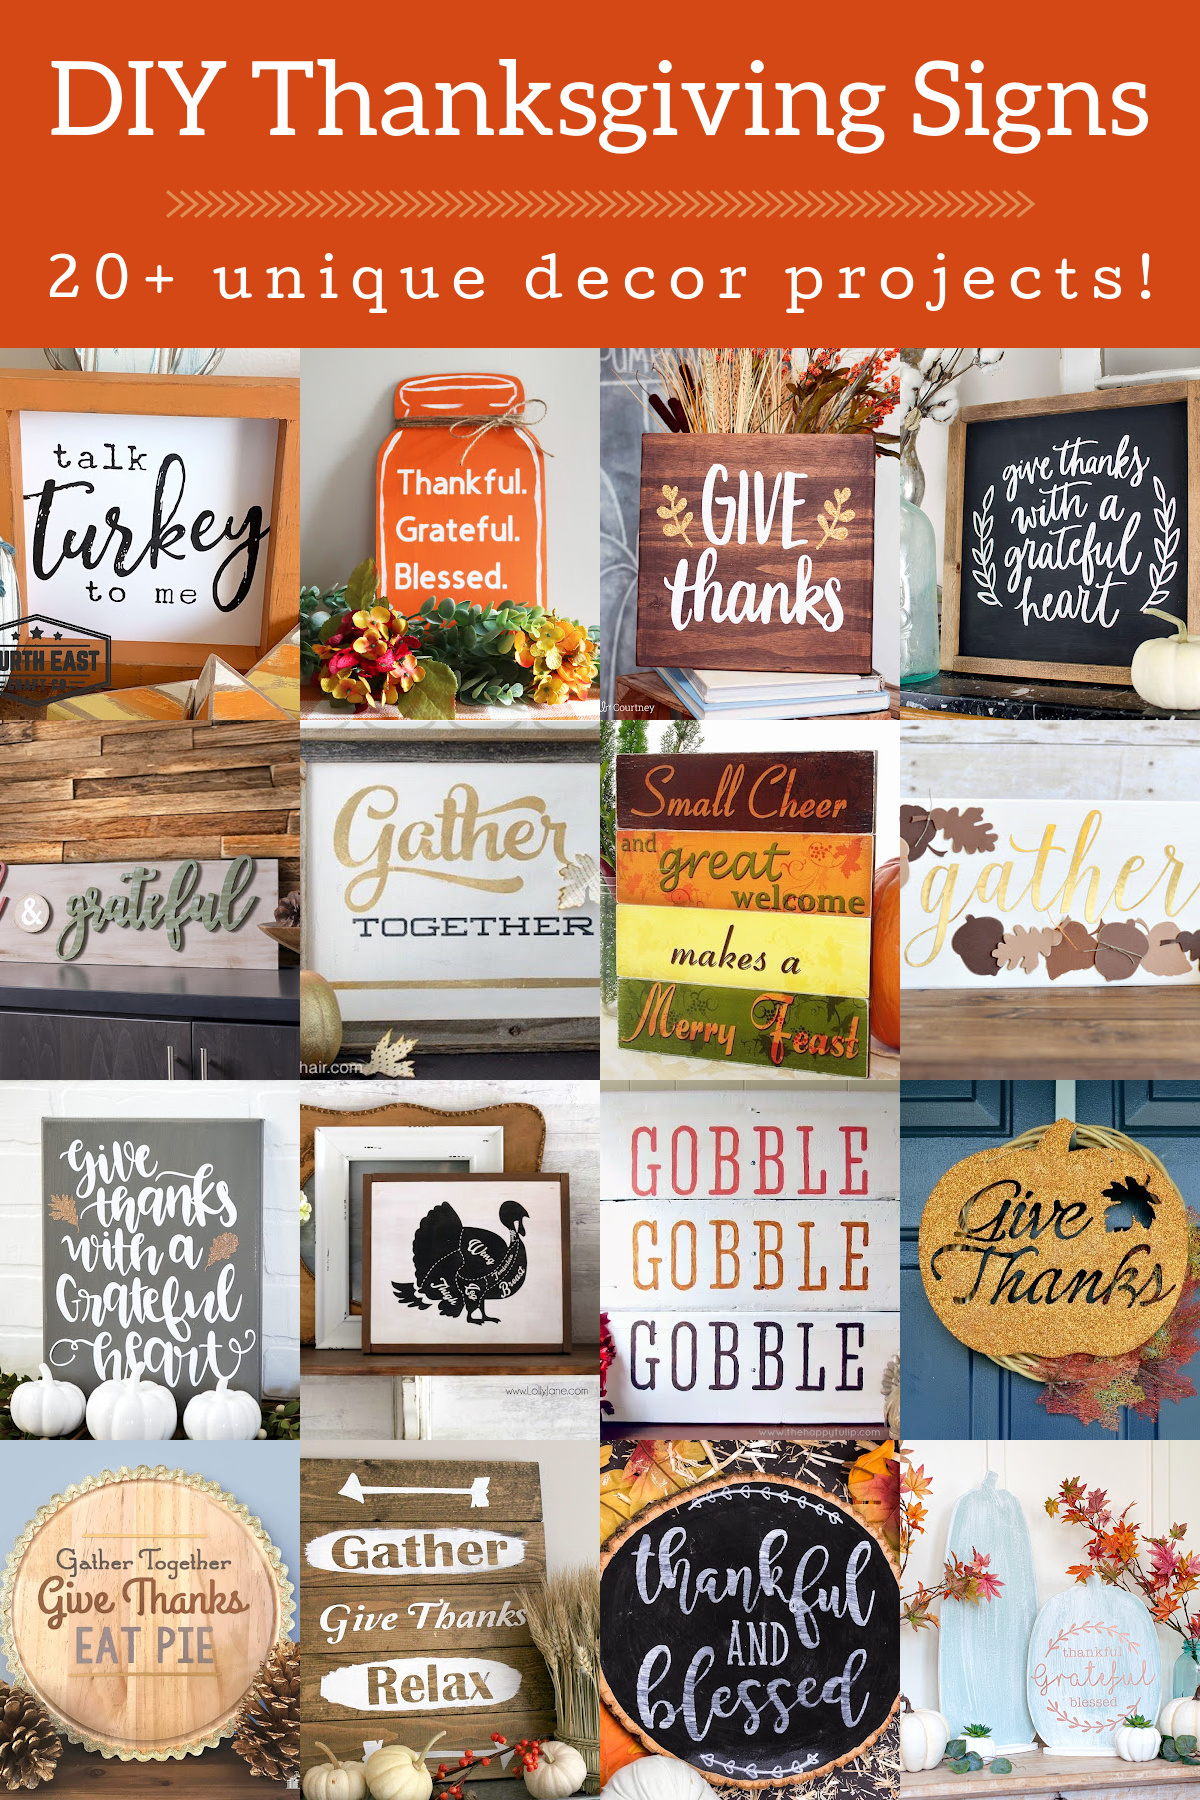 DIY Thanksgiving signs for your home